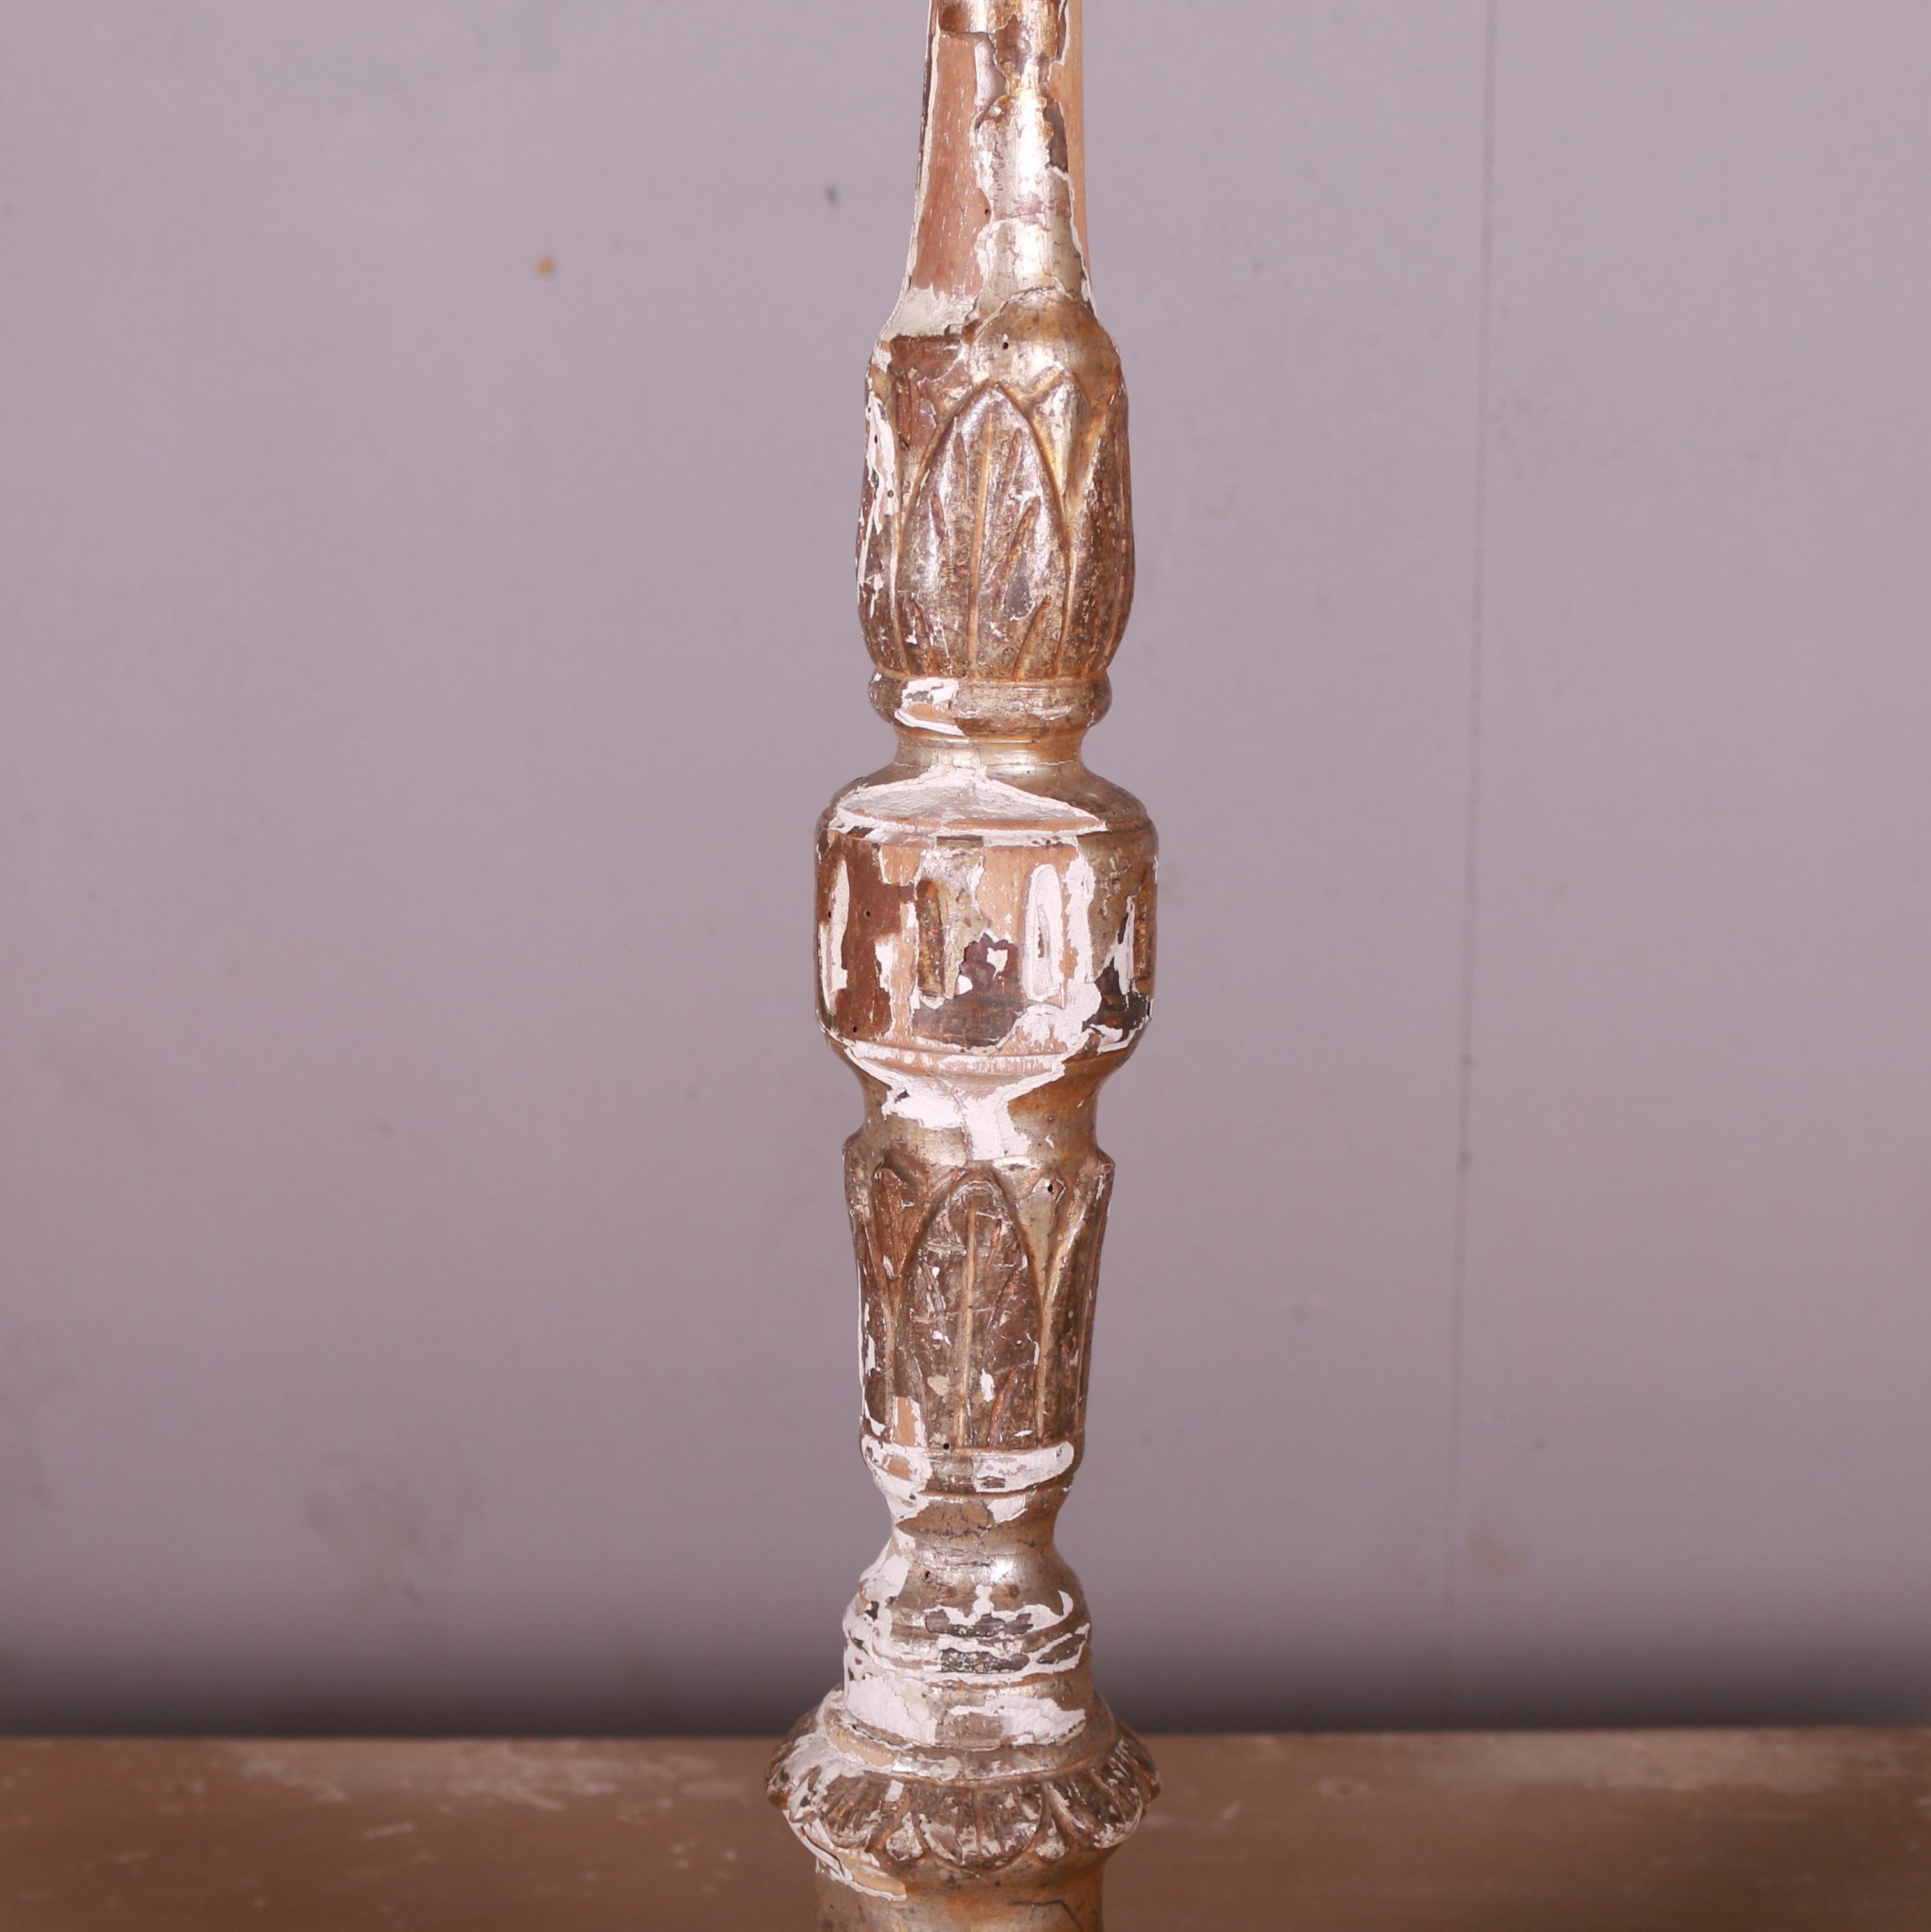 Italian Giltwood Candle Holder In Good Condition For Sale In Leamington Spa, Warwickshire